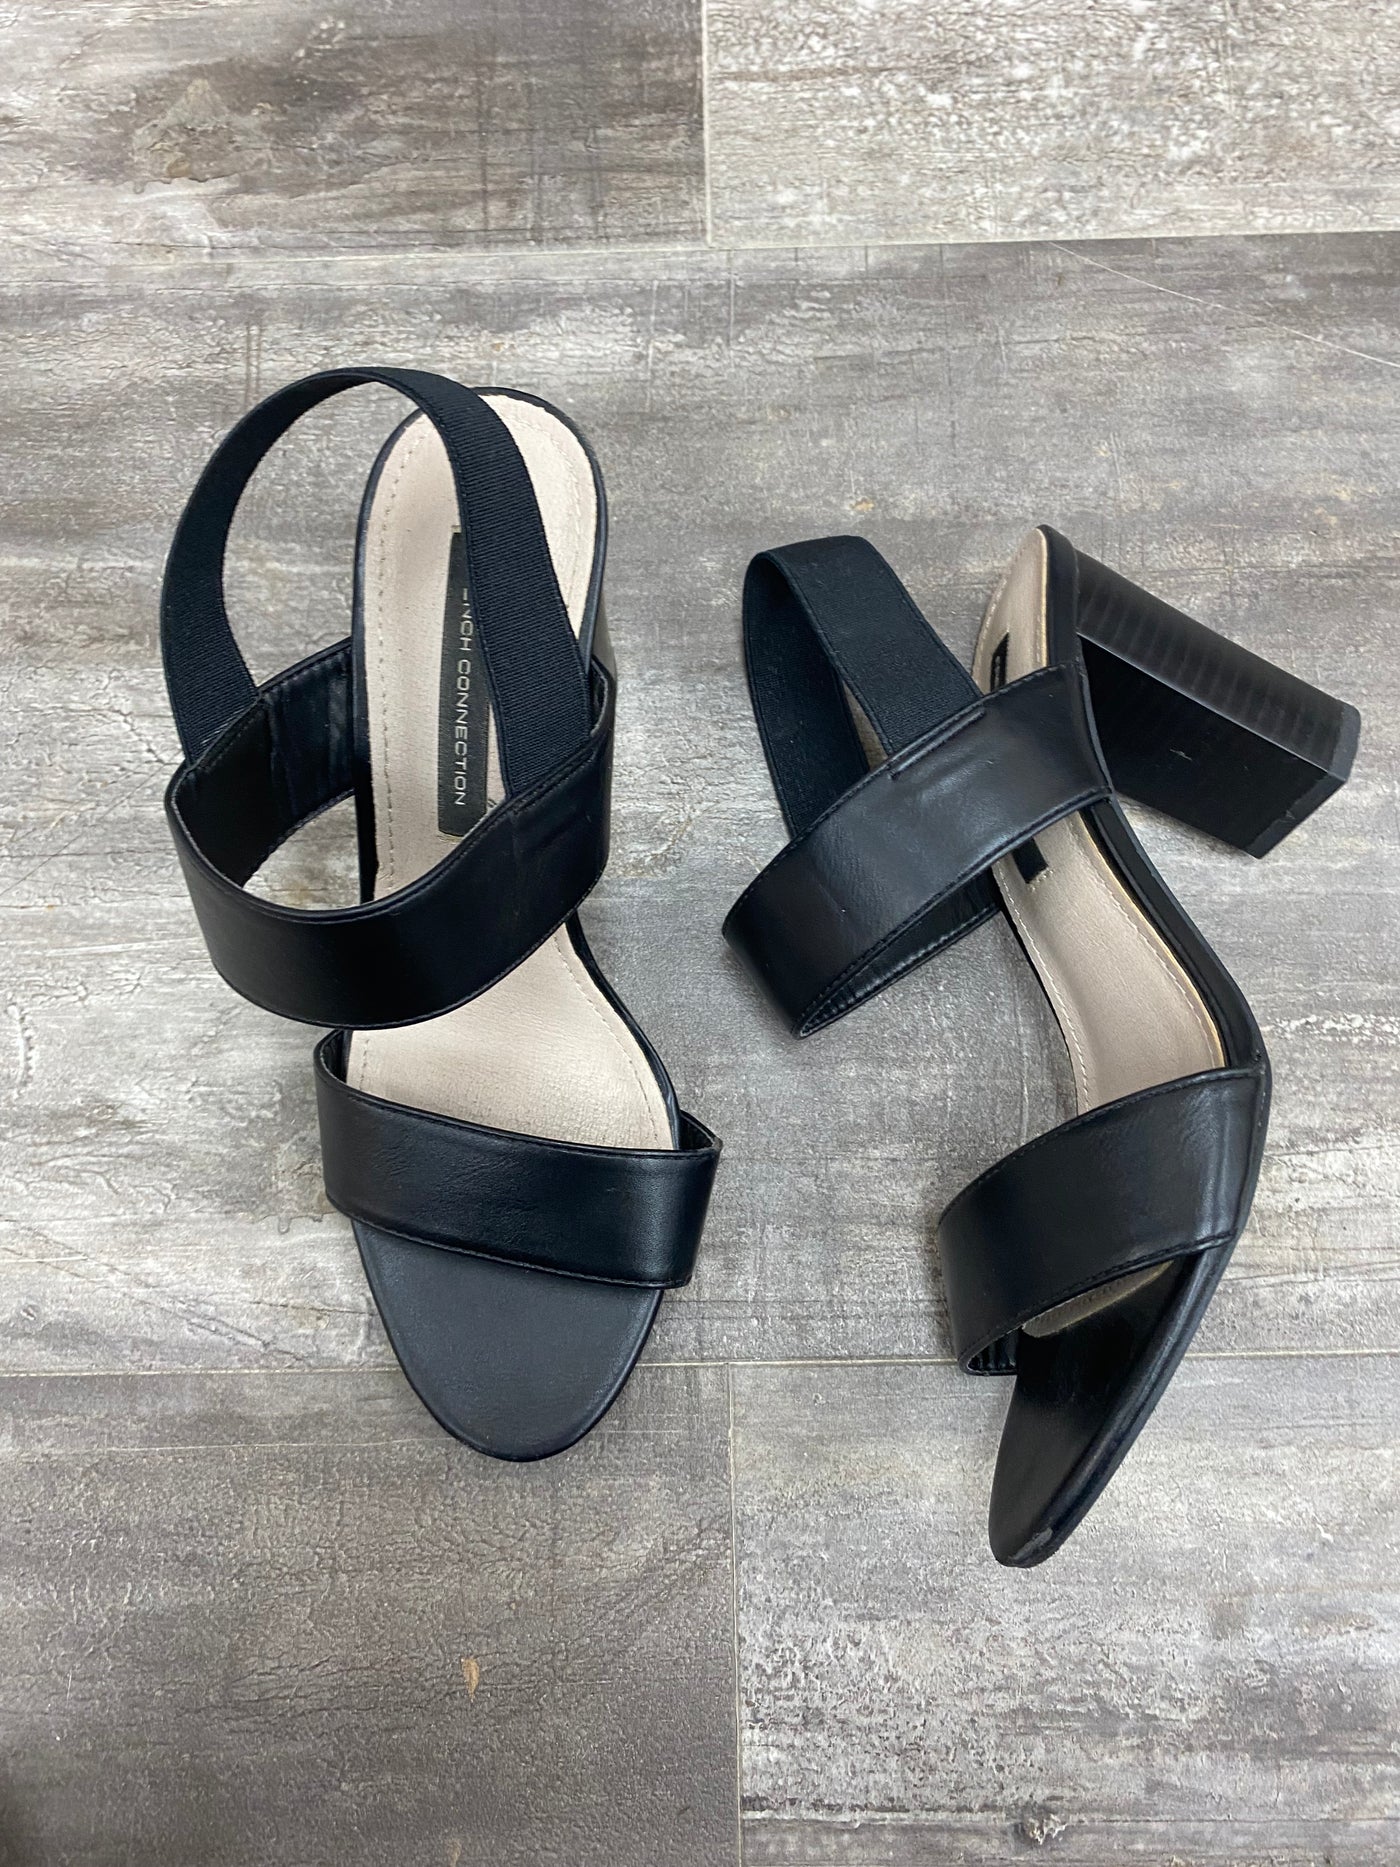 French Connection black (shorter) heels